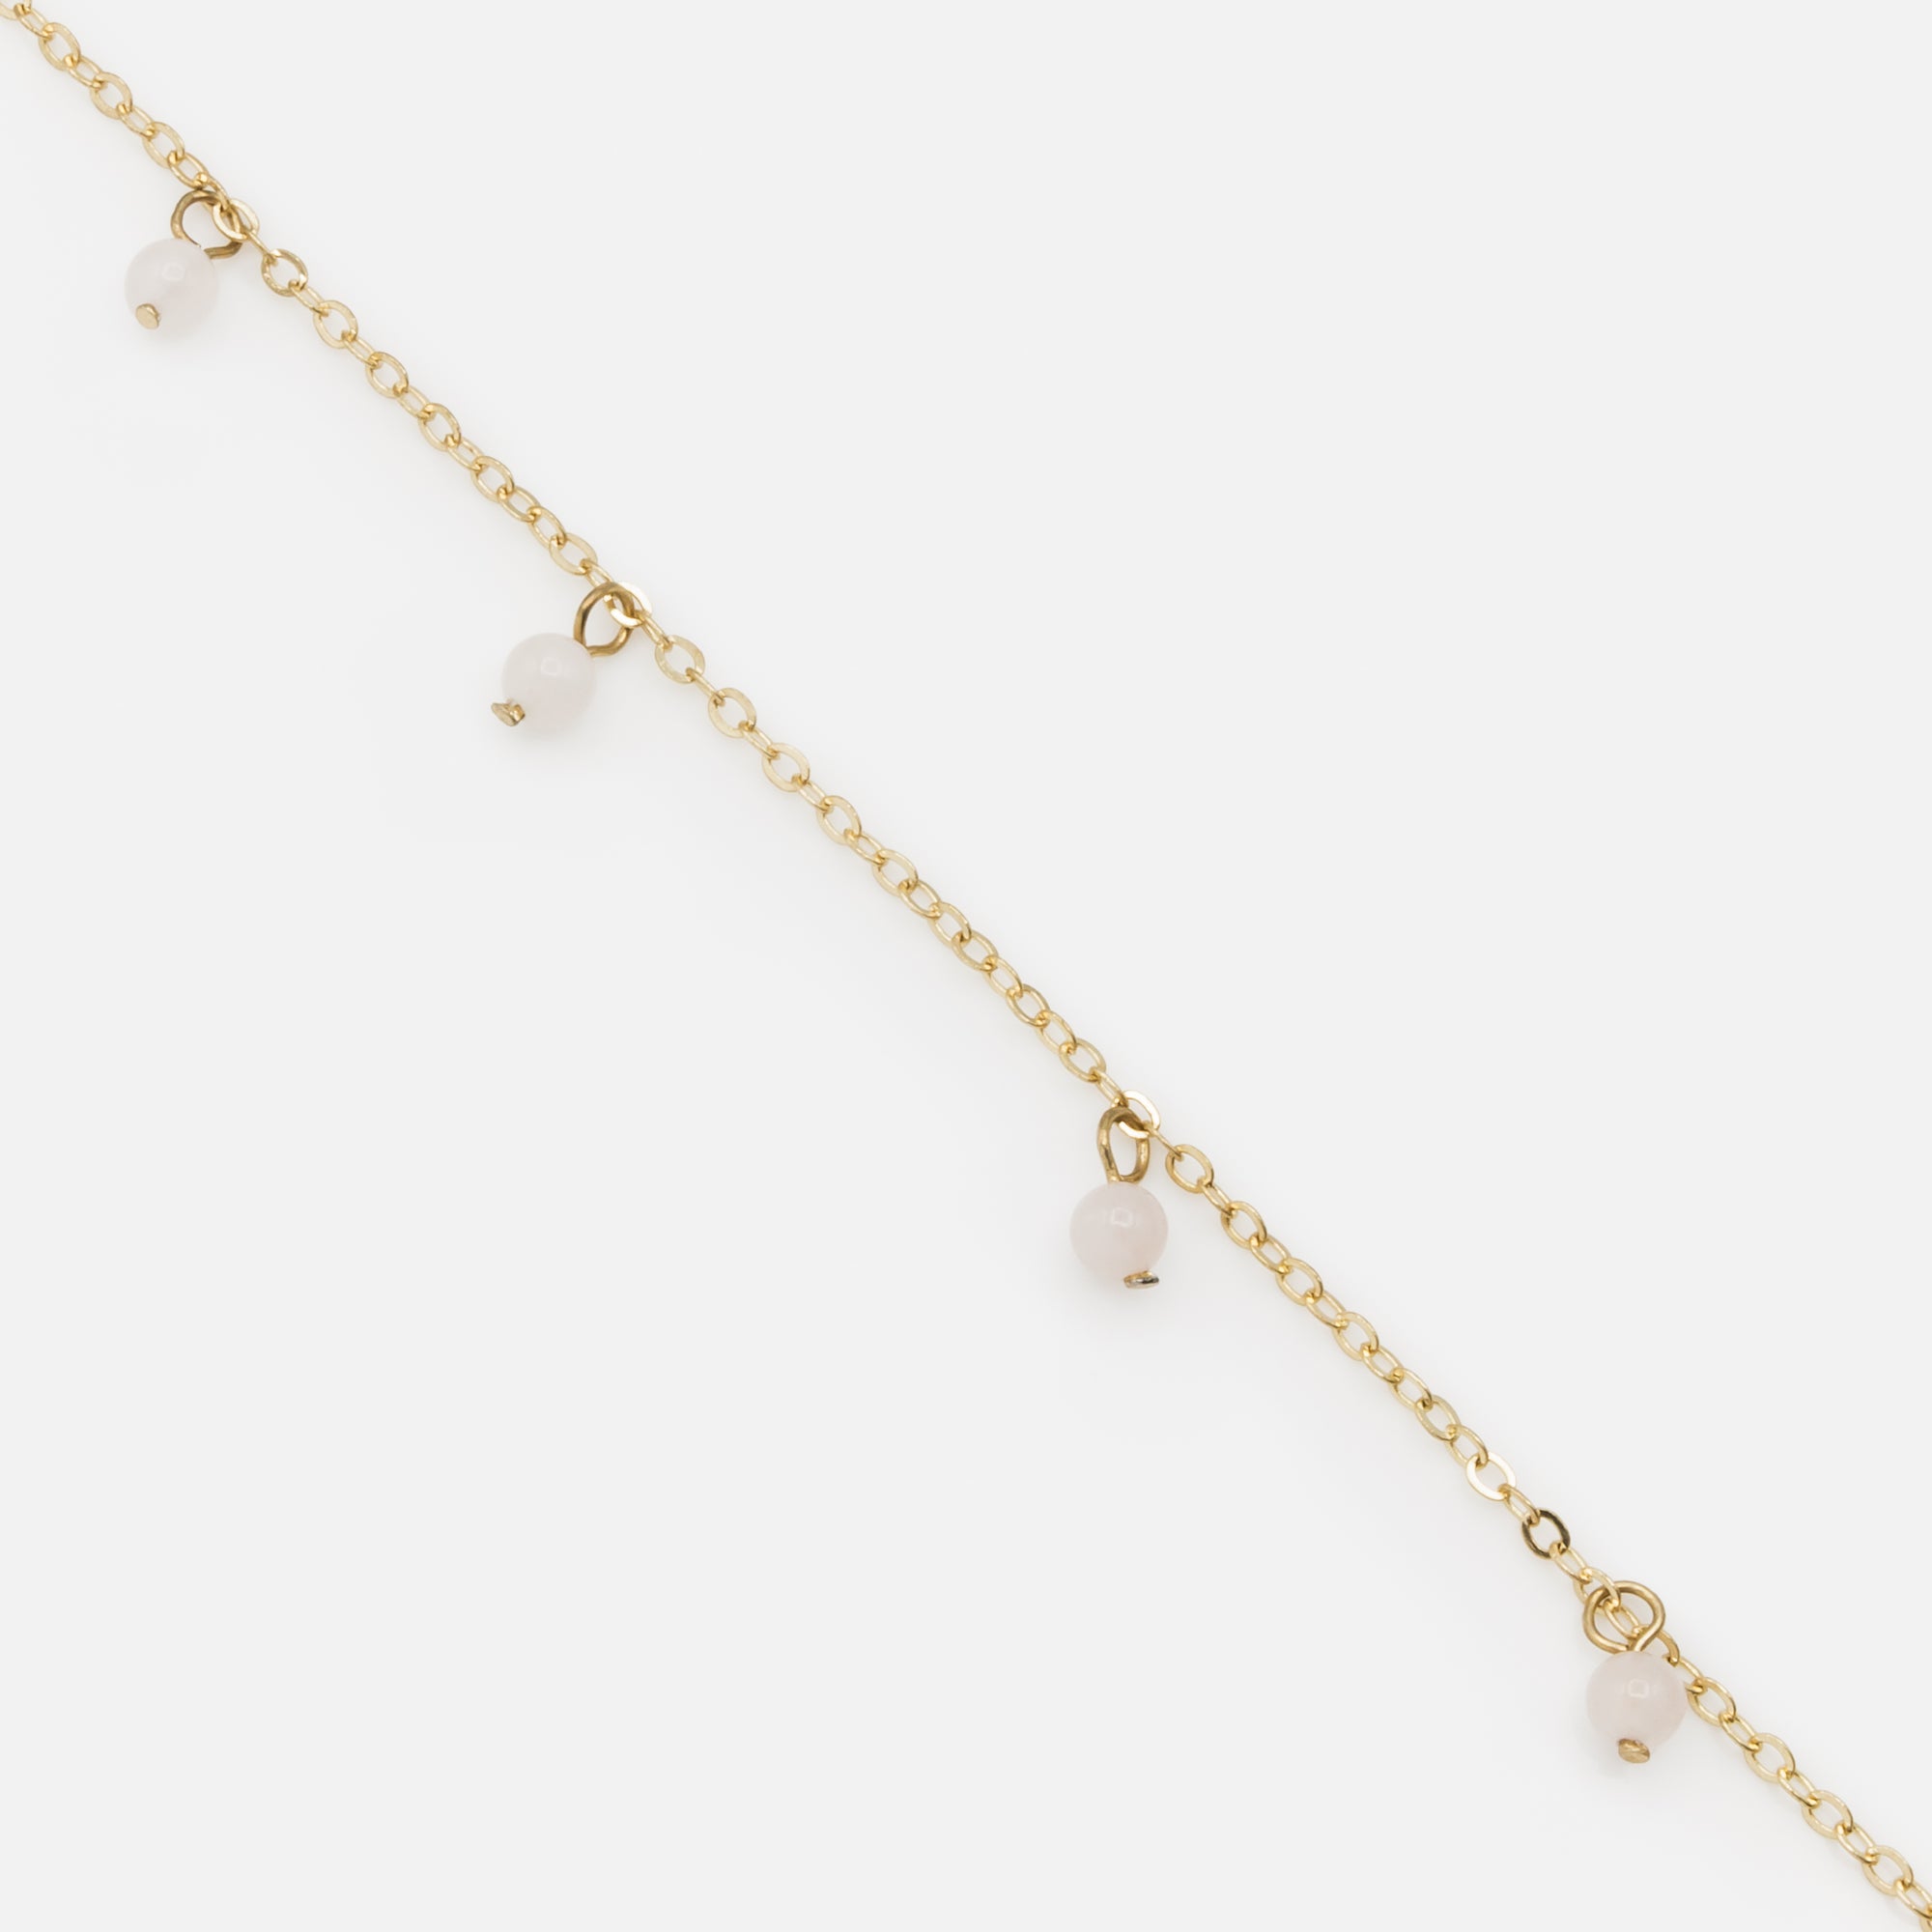 Gold anklet with pale pink beads